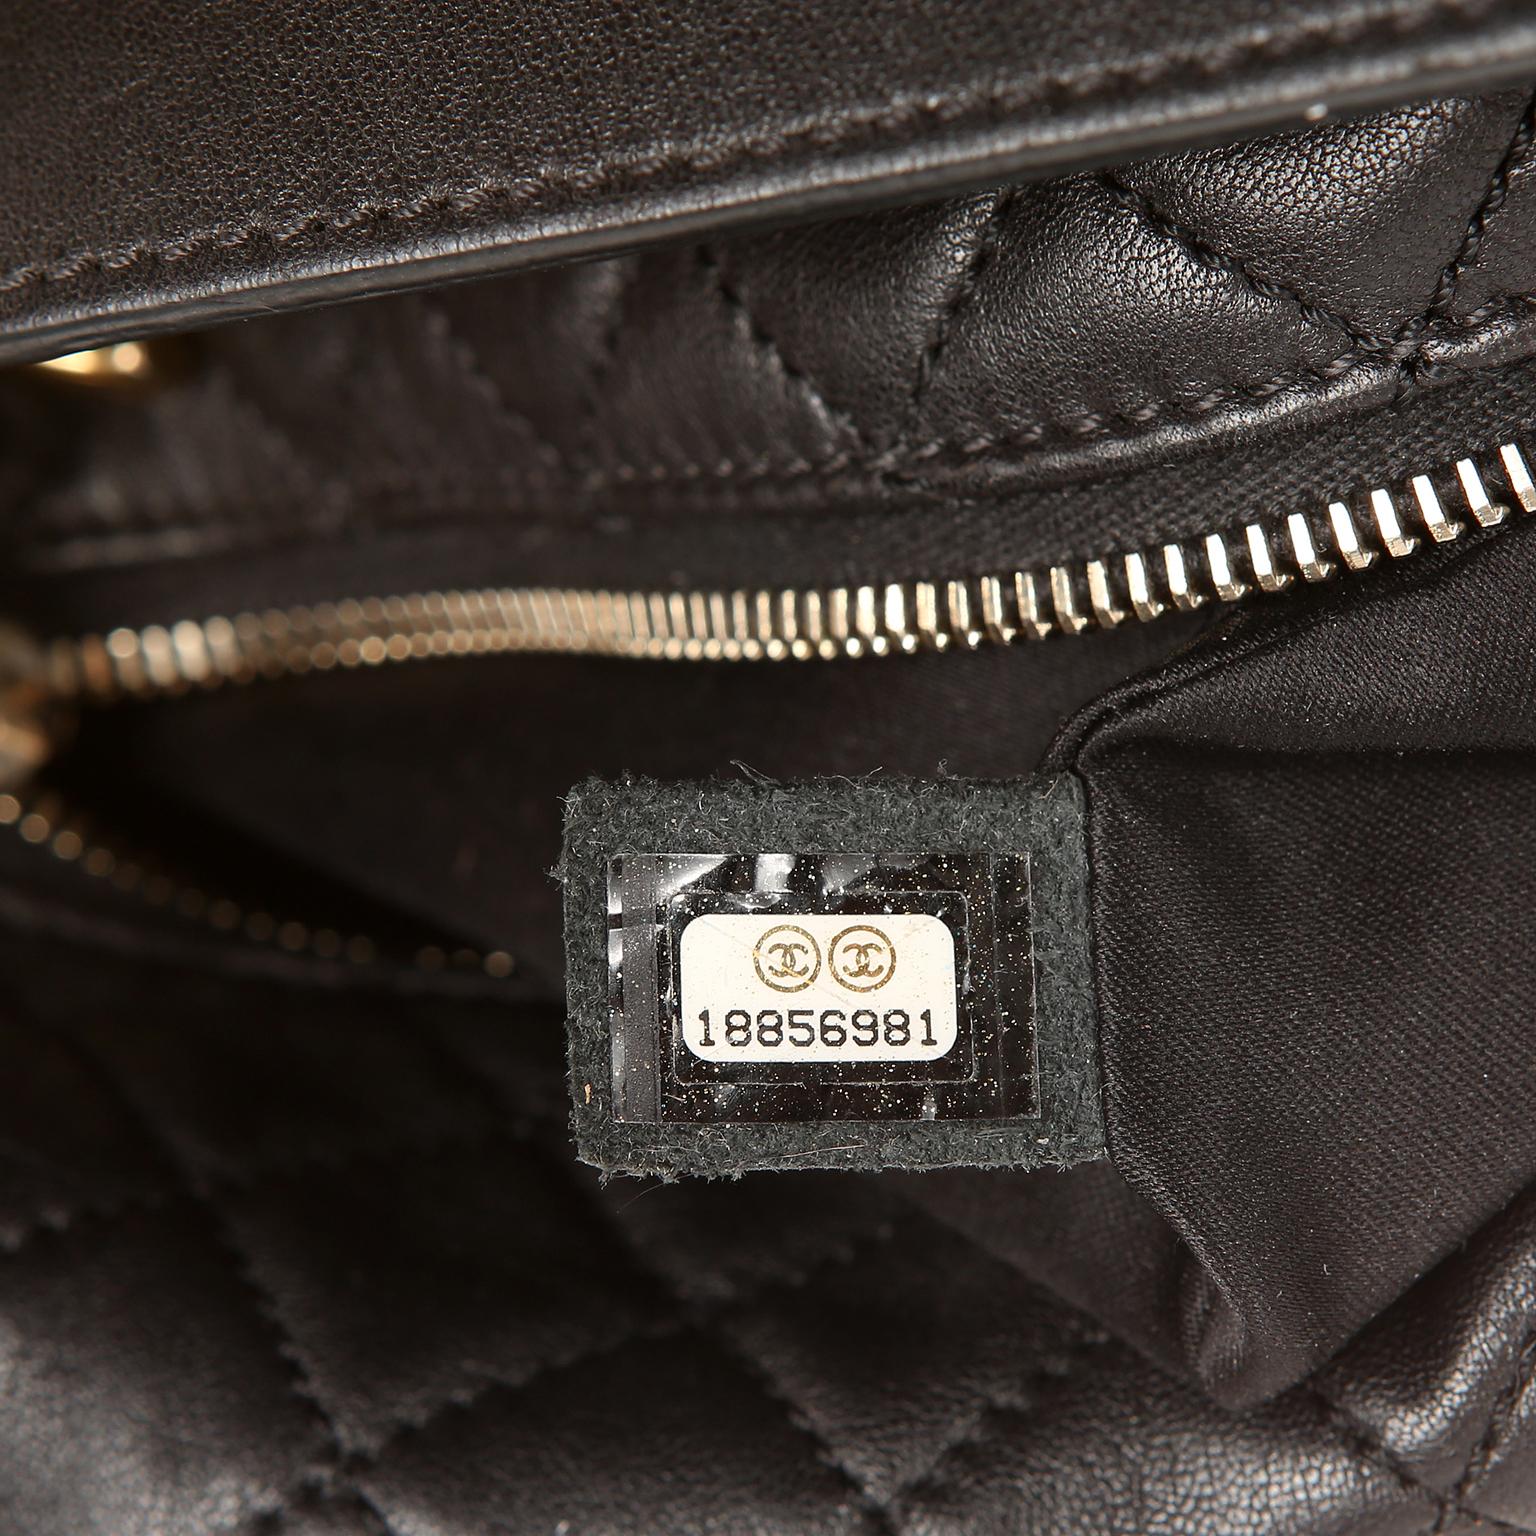 Chanel Black Quilted Leather Crossbody Bag 5